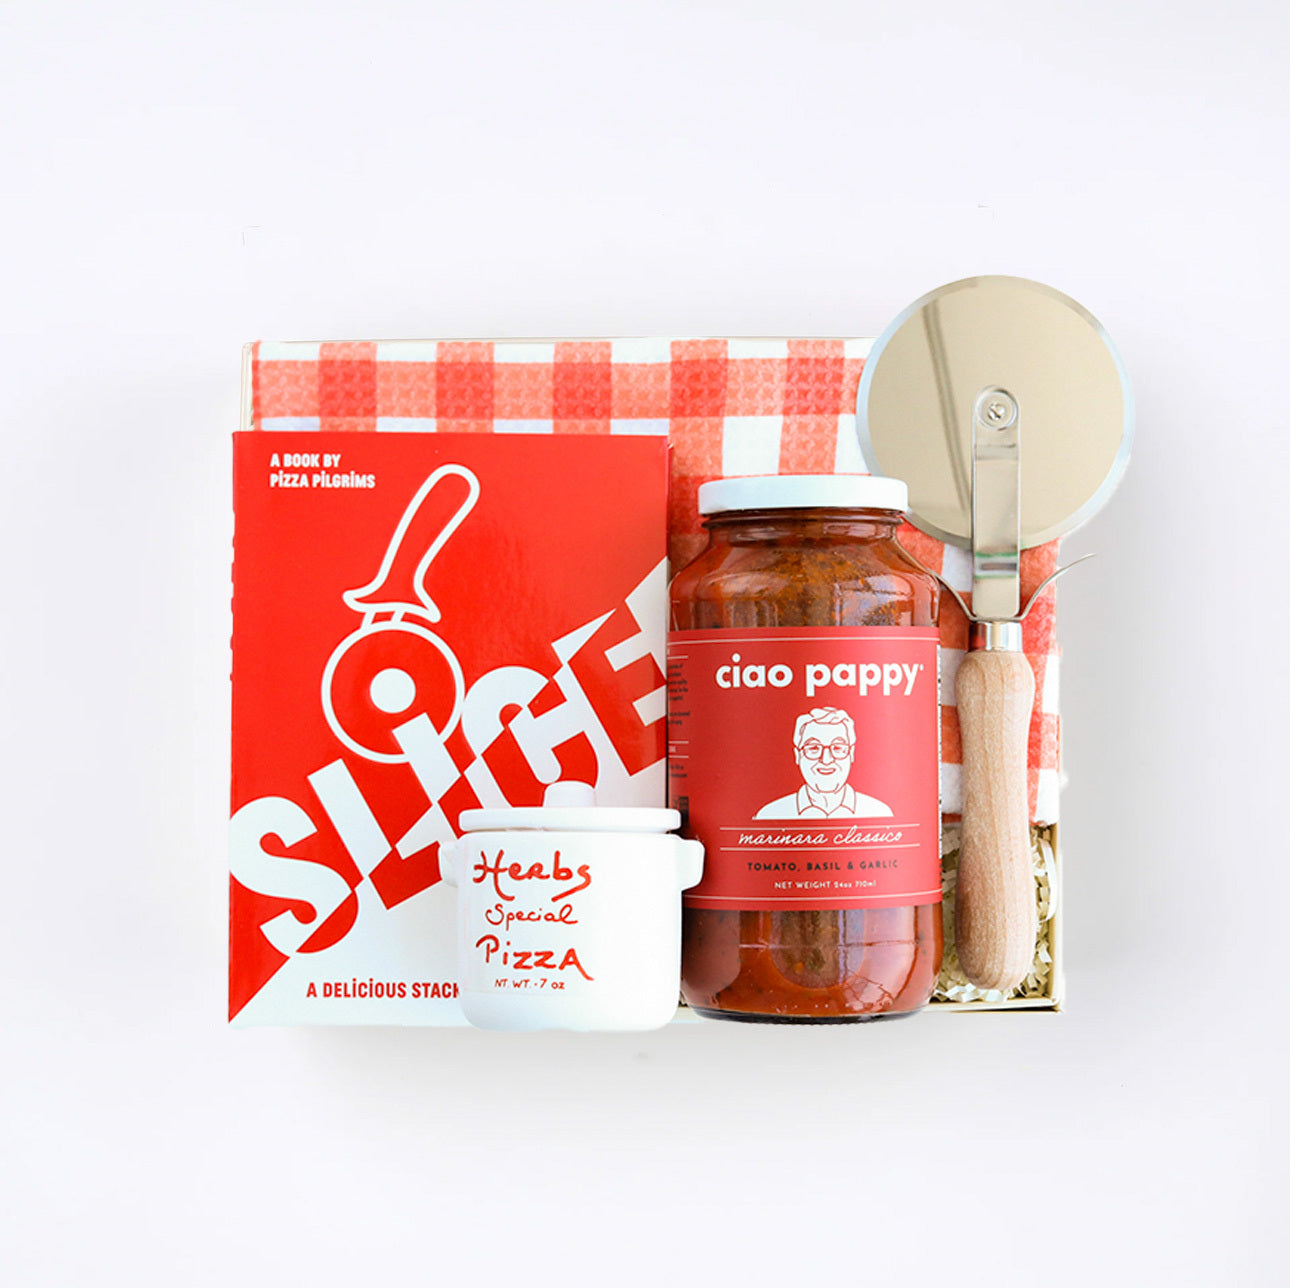 BOXFOX creme gift box packed with &quot;Slice&quot; Pizza book, wood pizza cutter, Ciao Pappy Marinara sauce, Pizza herbs jar and plaid red Geometry tea towel.